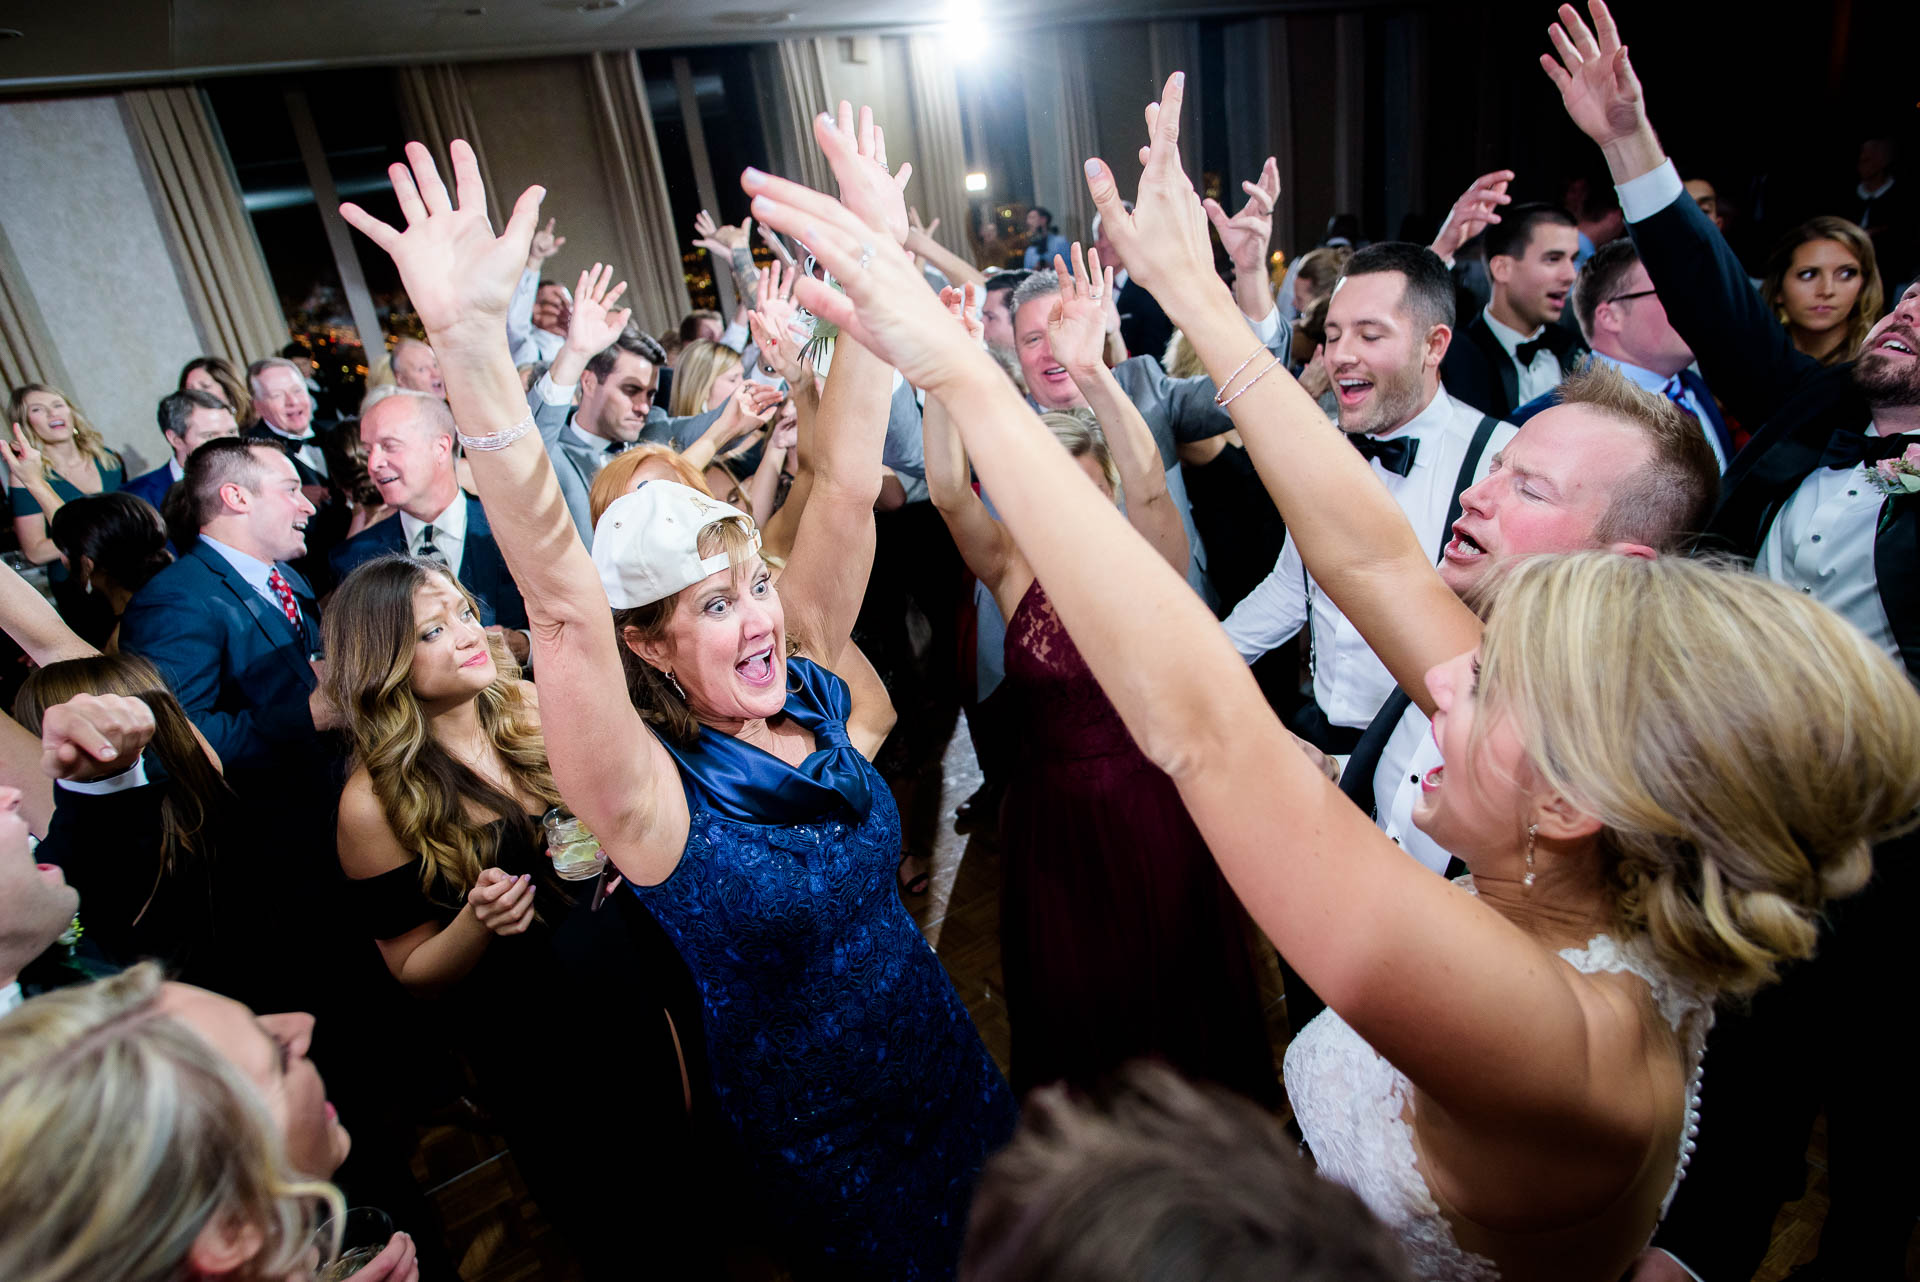 Packed dance floor during a wedding reception at the Mid America Club in Chicago.